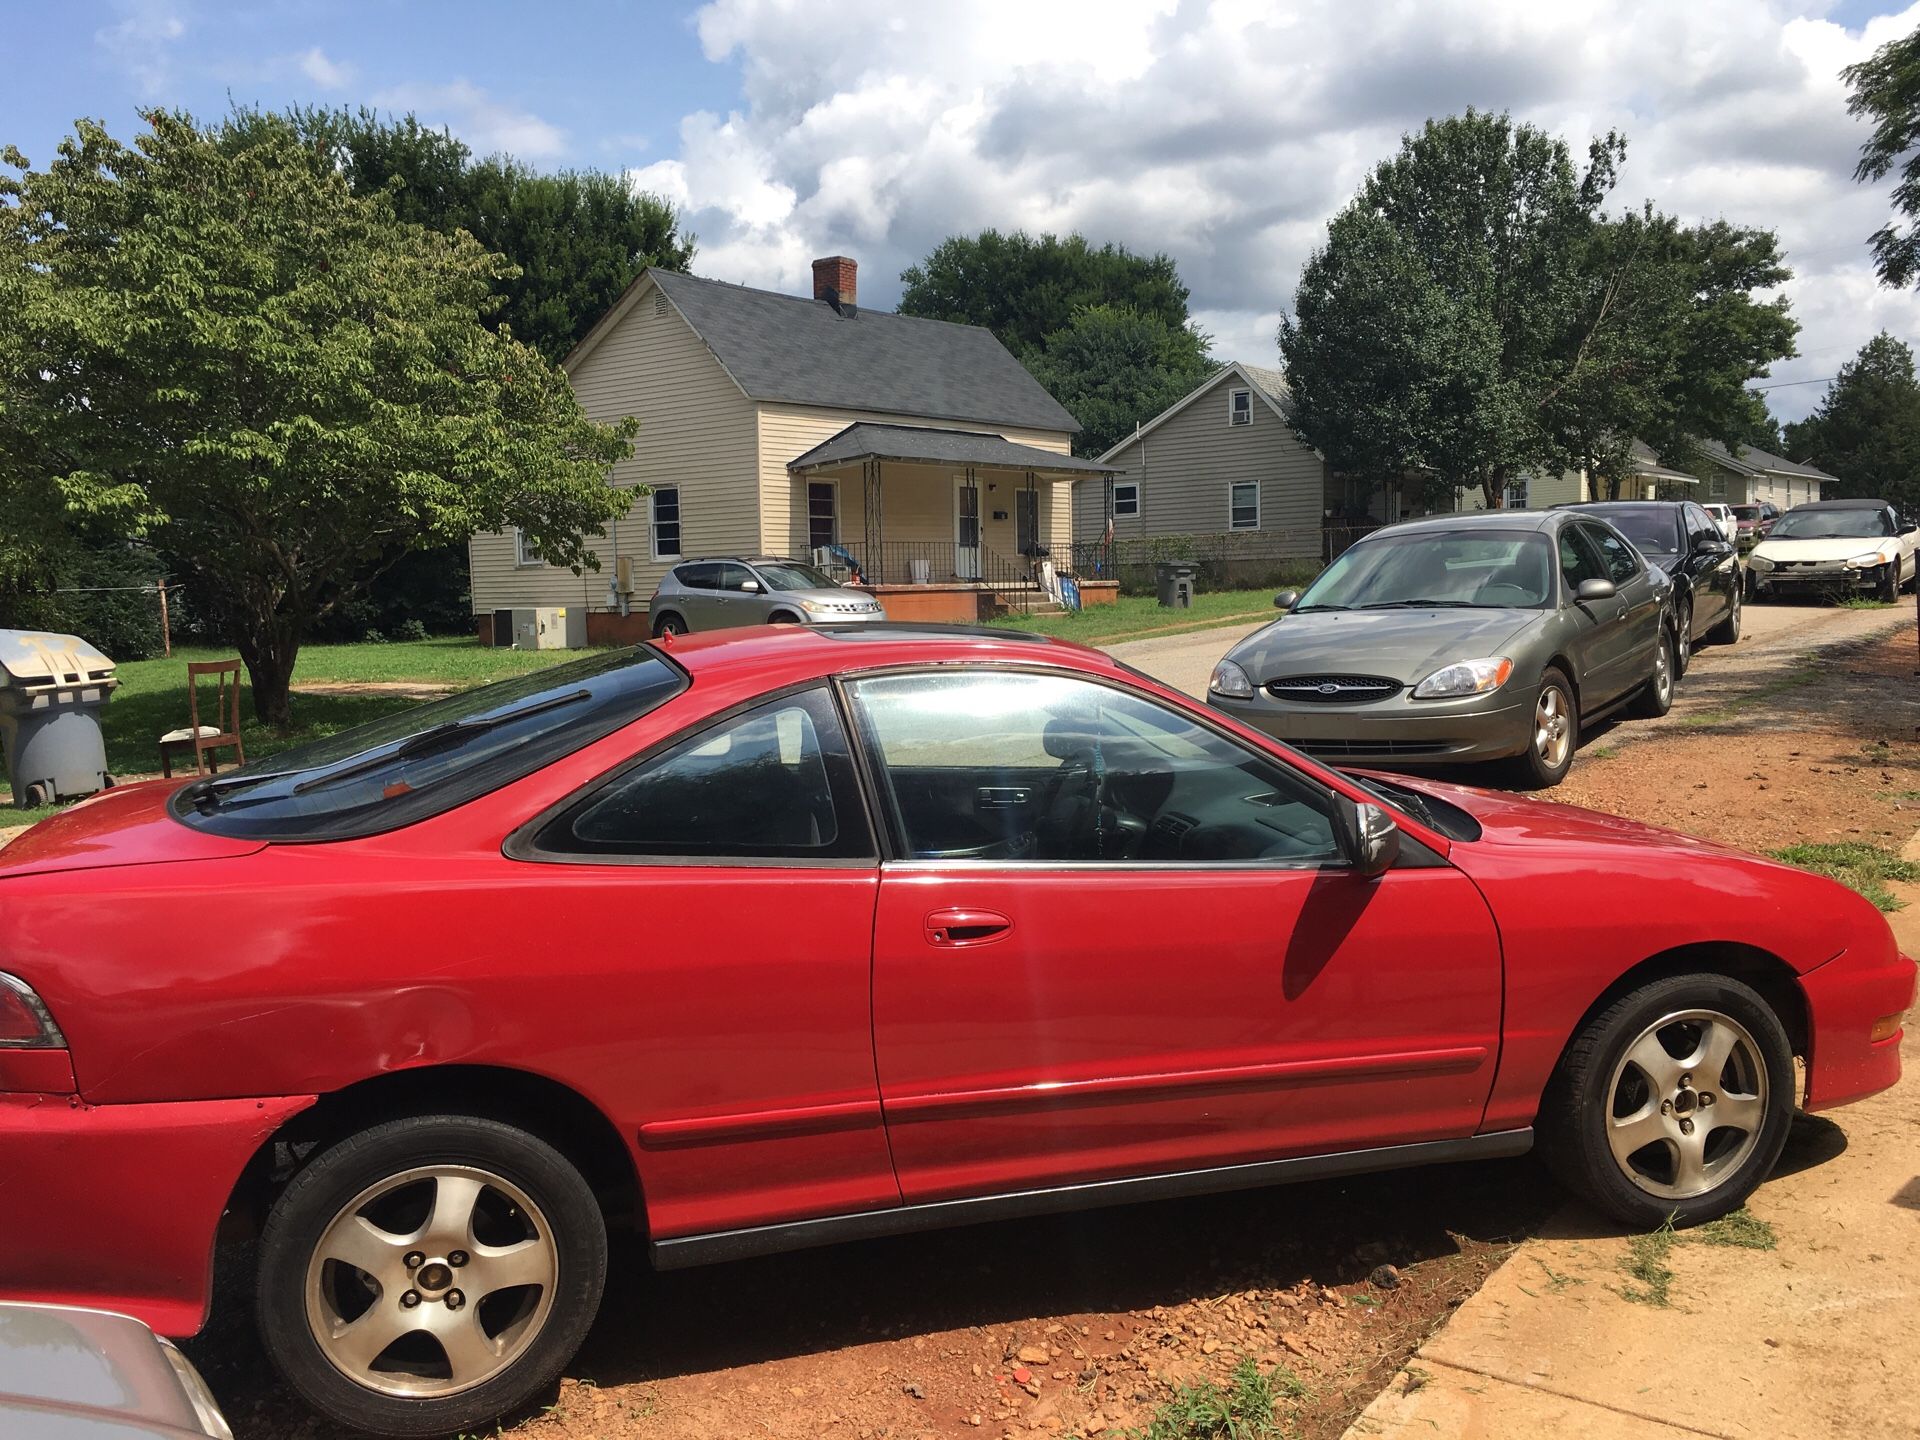 1995 Acura Integra salvage 102931 miles Runs great new battery fresh oil {url removed}